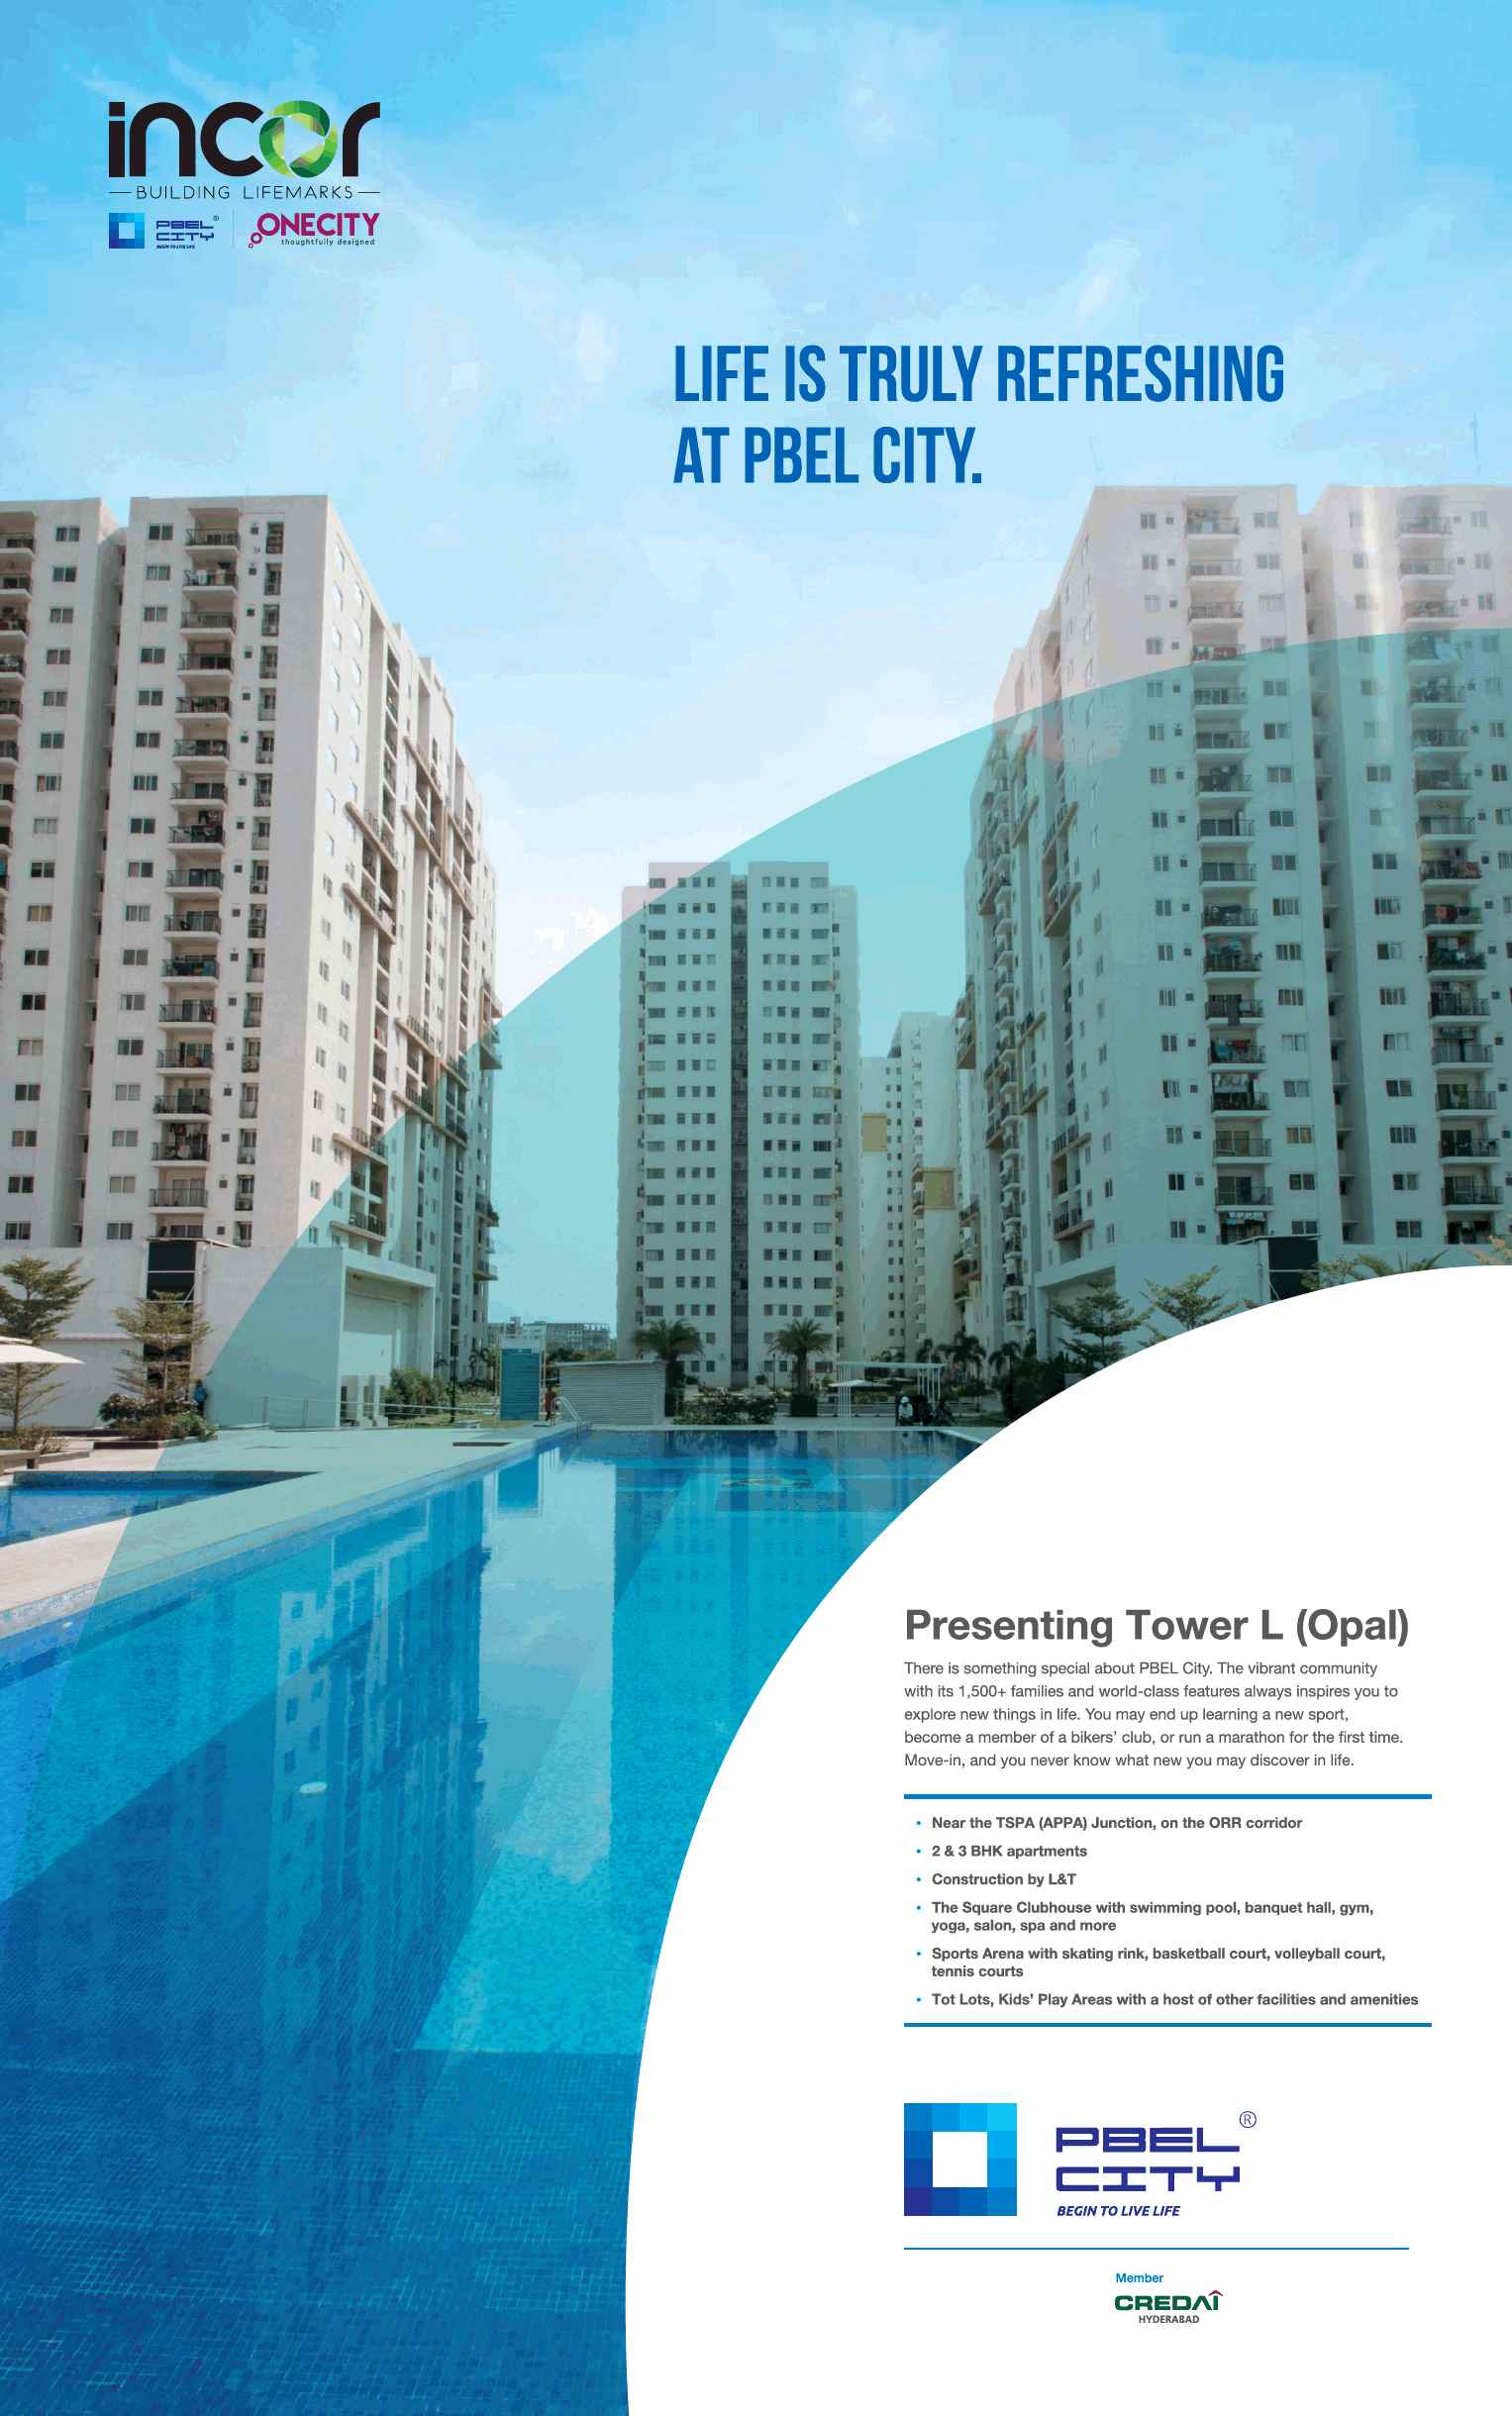 Presenting Tower L (Opal) at PBEL City in Hyderabad